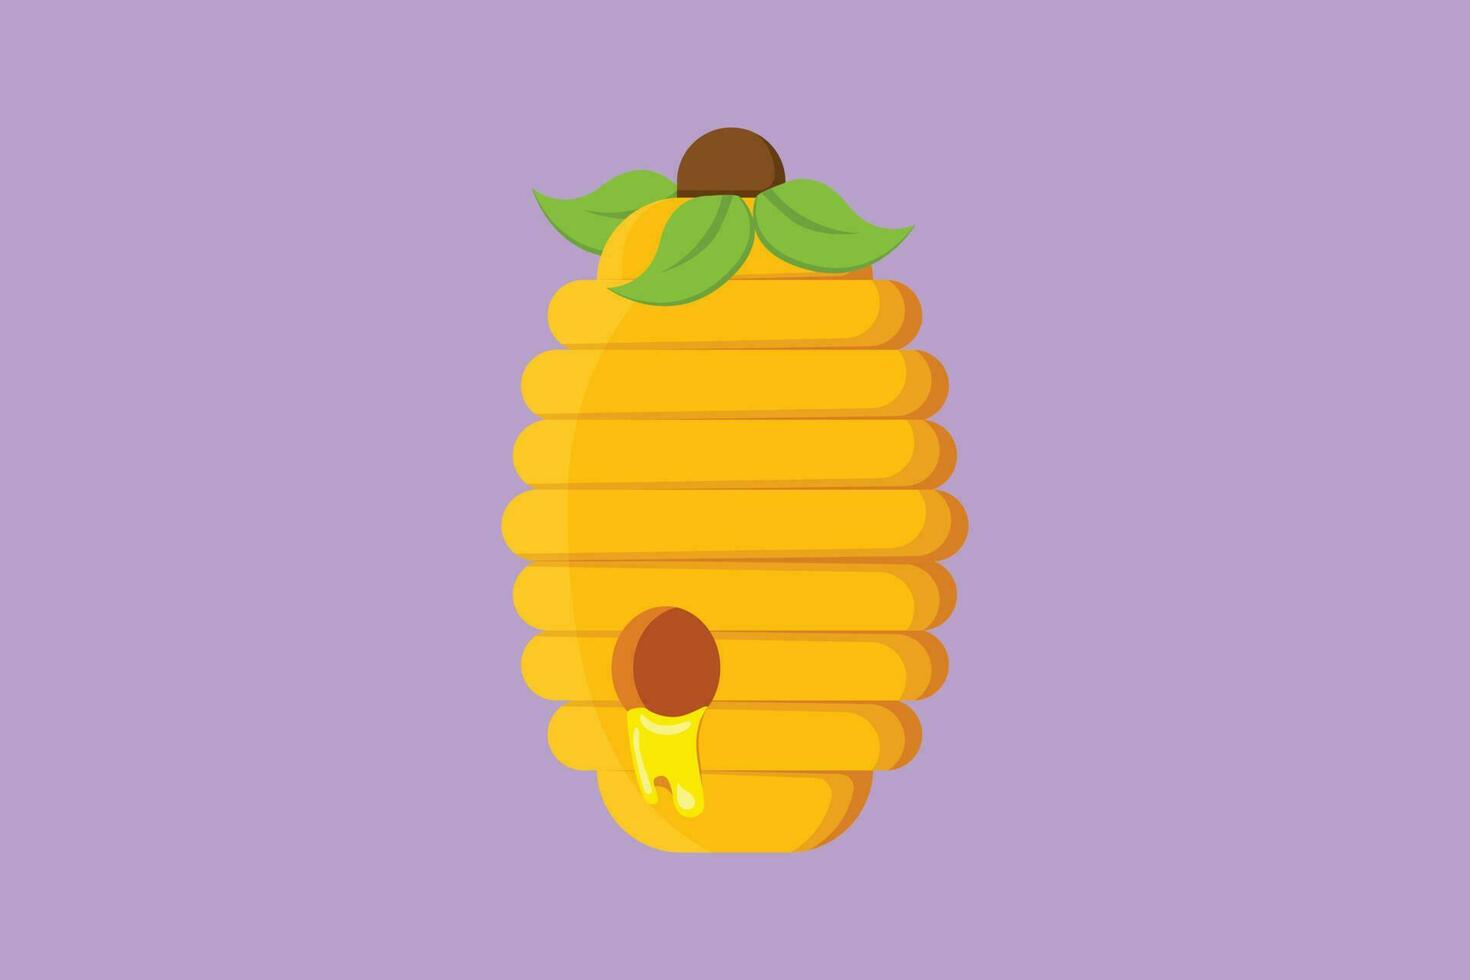 Cartoon flat style drawing of stylized bee hive with sweet honey drip from honeycomb. Natural healthy food concept. Organic supplement logotype, label, logo, symbol. Graphic design vector illustration